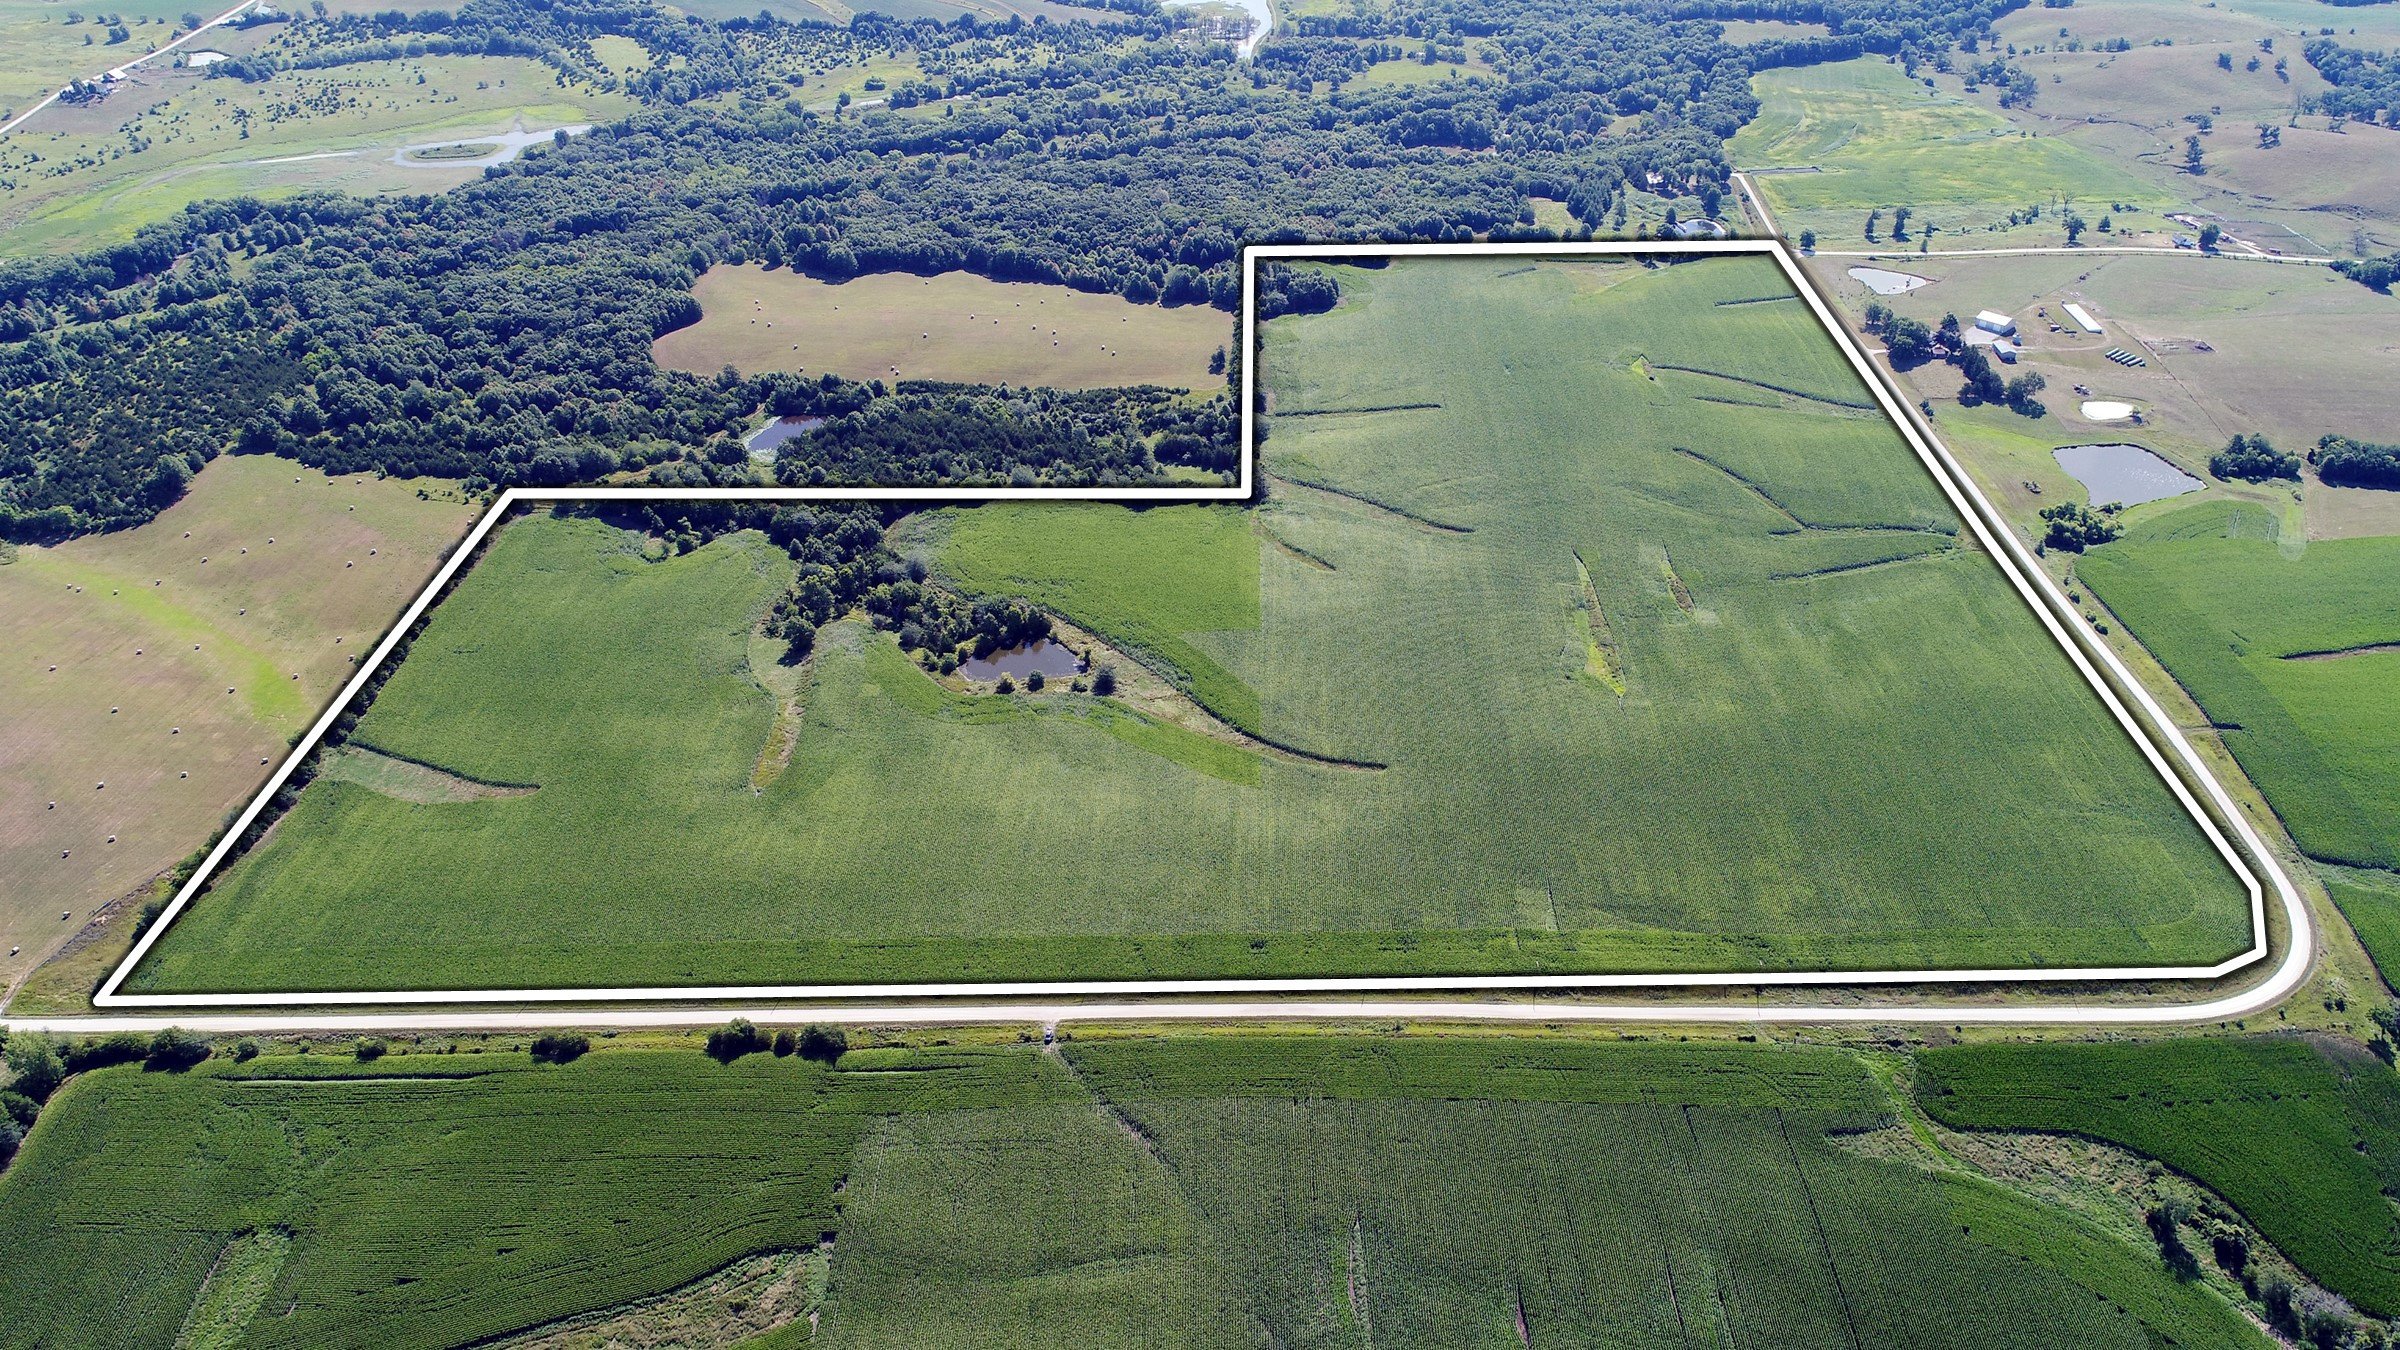 2-235th-ave440th-st-chariton-50049-Reece Tract 2 Aerial -0.jpg